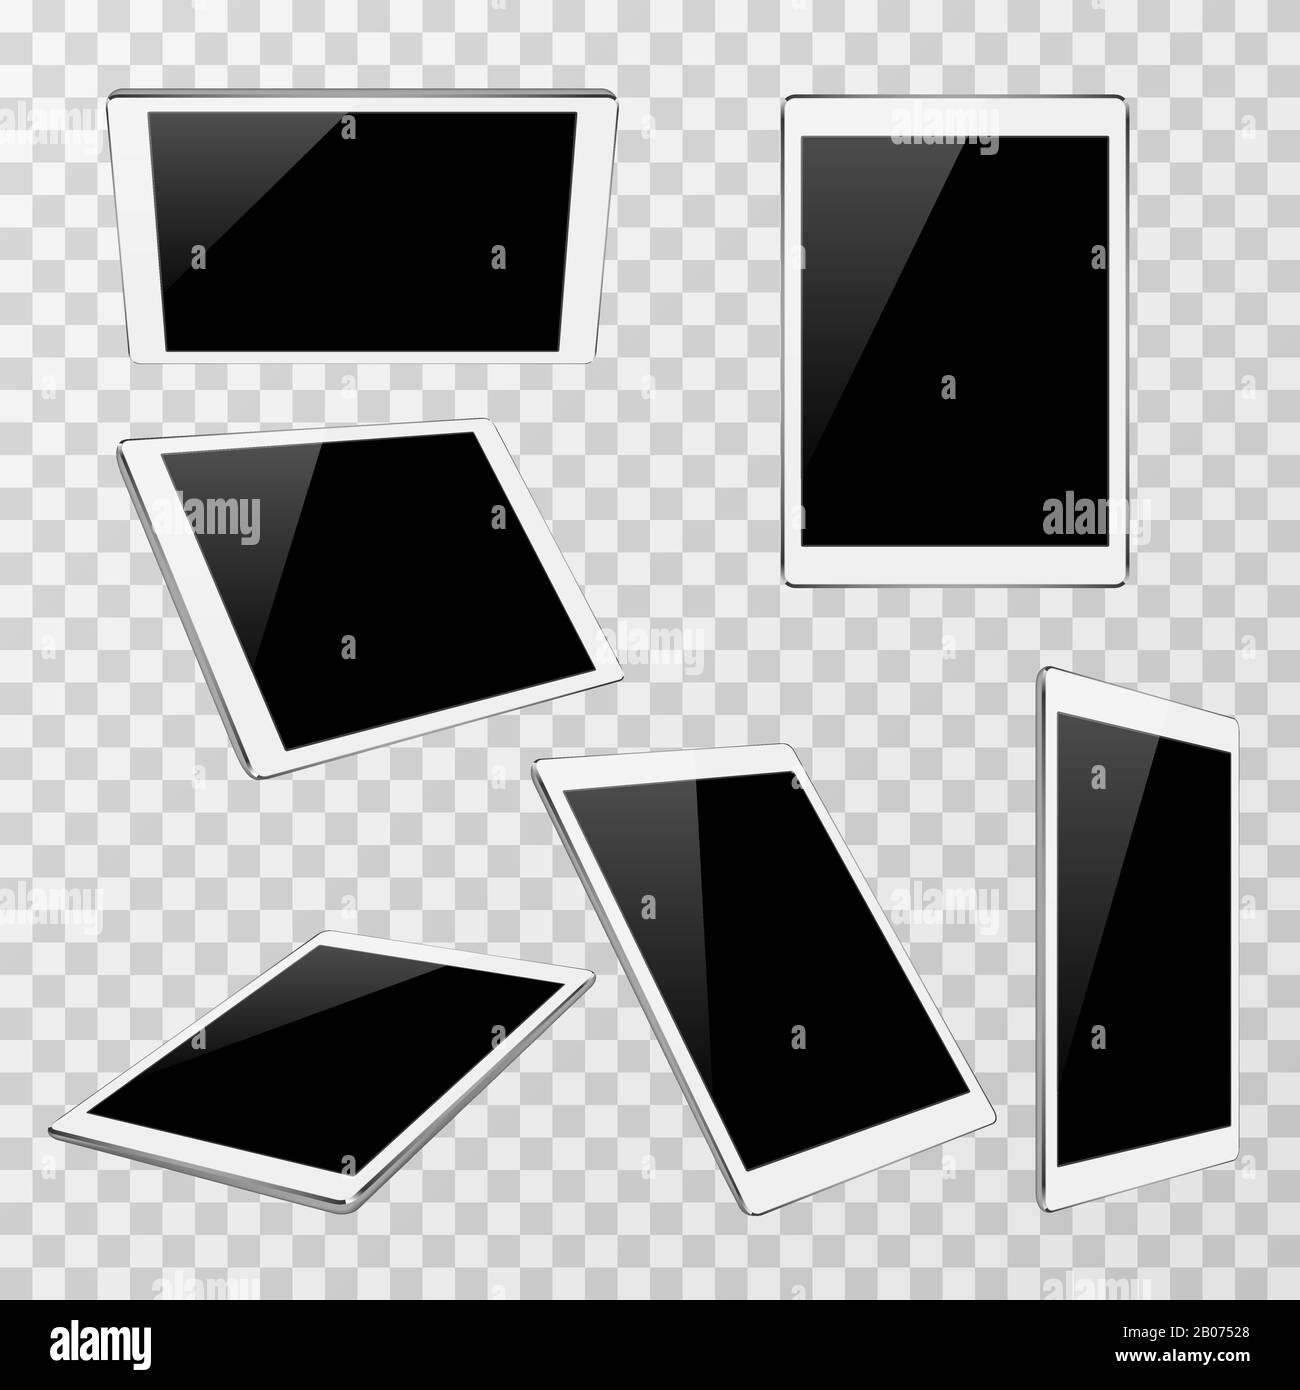 White vector tablet at different angles of view isolated on transparent plaid background. Set of modern portable gadget illustration Stock Vector